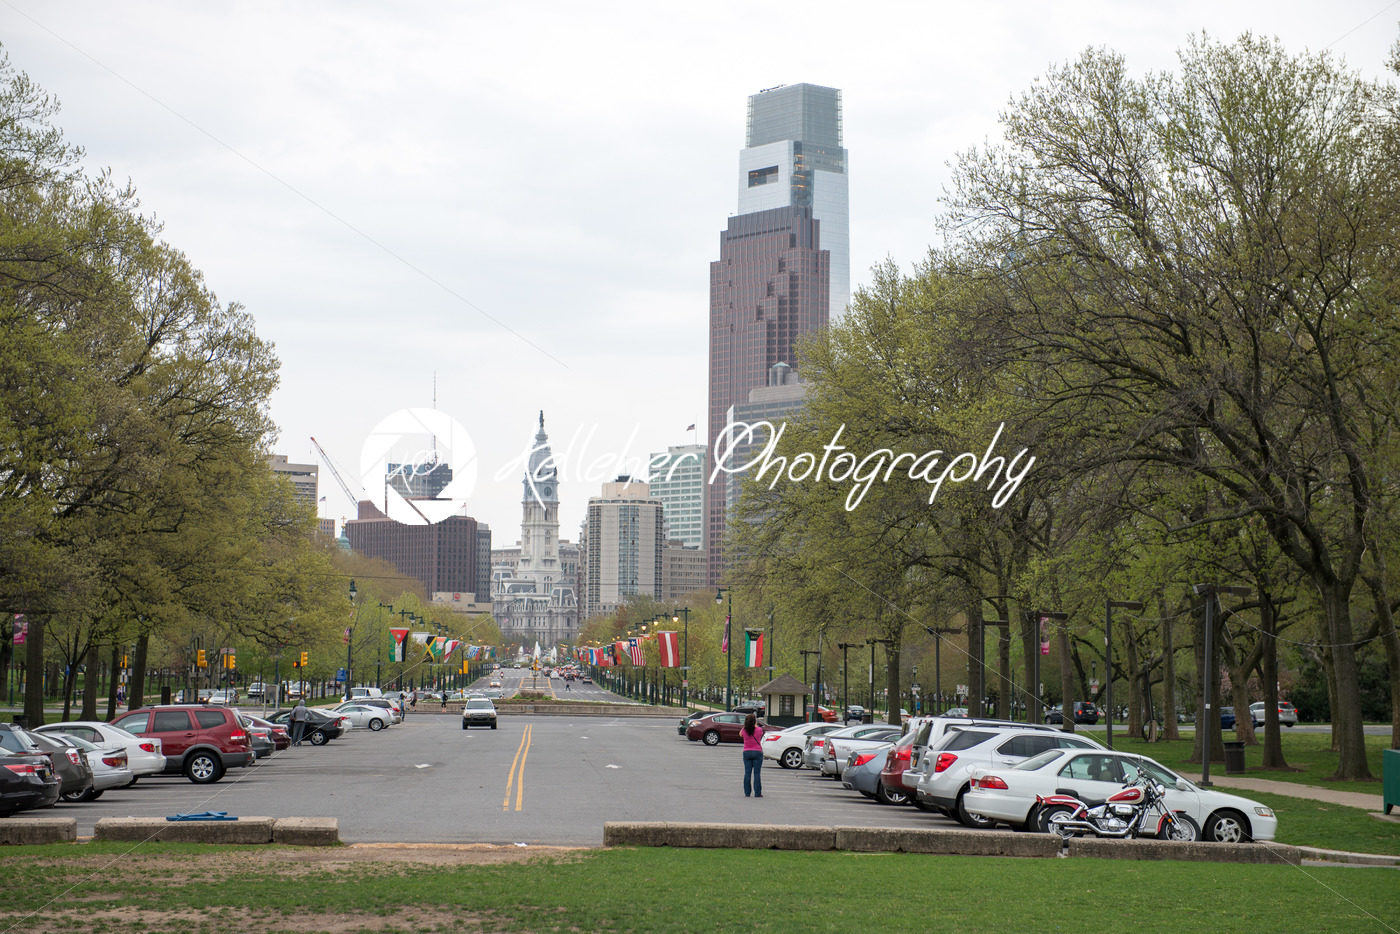 PHILADELPHIA, PA – APRIL 19: Benjamin Franklin Parkway from the Philadelphia Museum of Art with Center City skyscraper buildings in the background on April 19, 2013 - Kelleher Photography Store